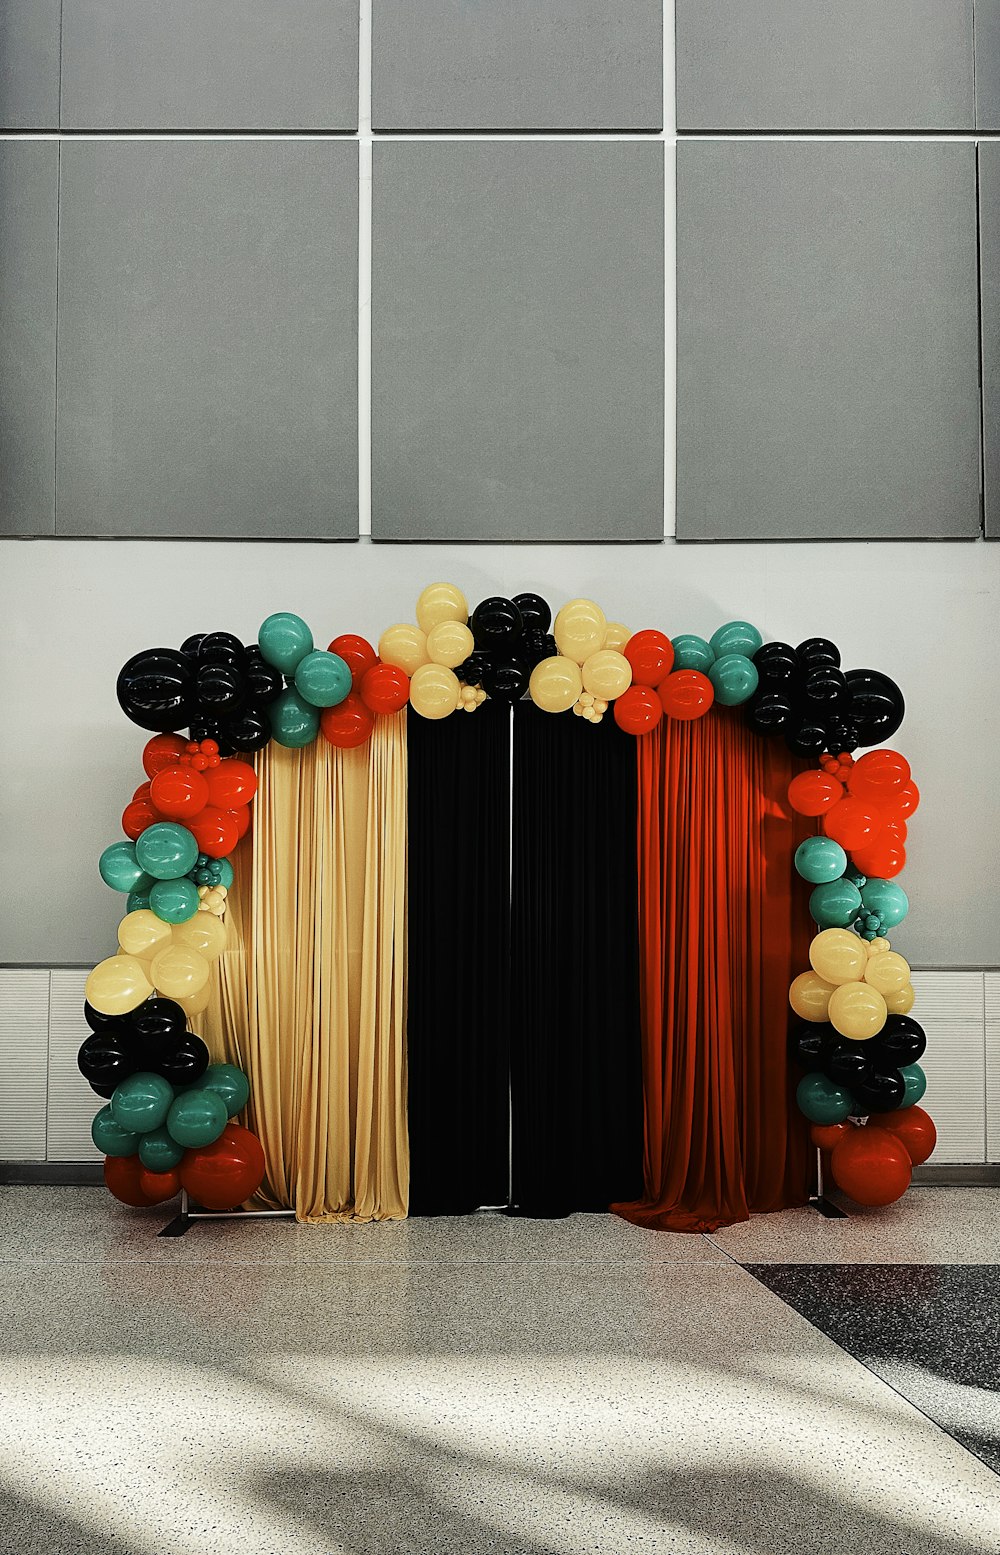 a black, orange, and gold balloon arch with black curtains